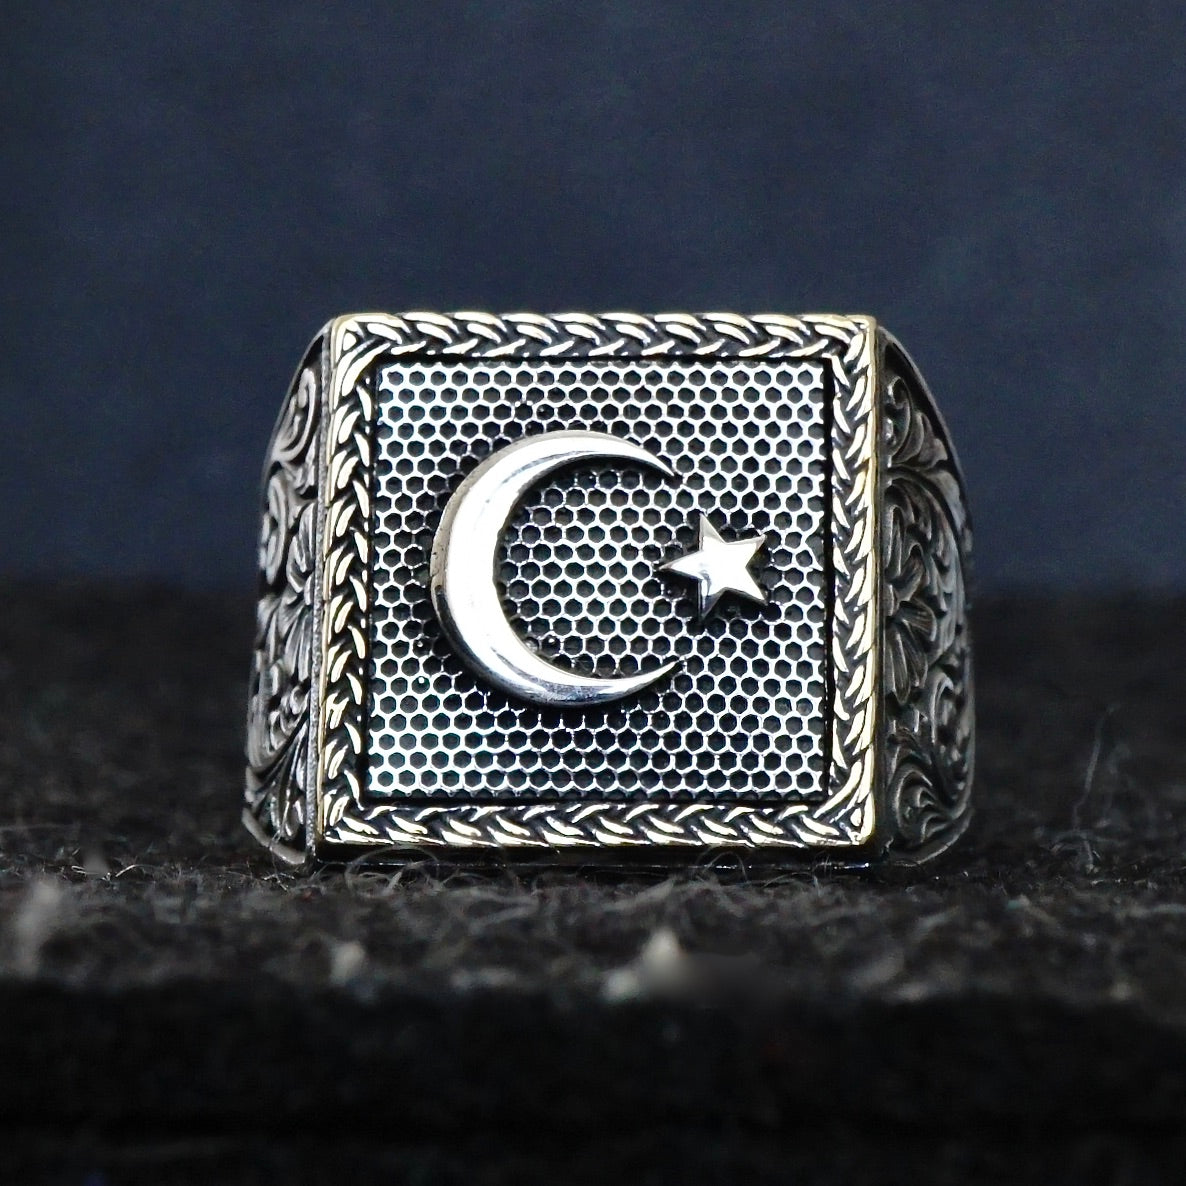 Sterling Silver Ring Crescent Star Men's Jewelry Engraved Turkish Ottoman Islamic